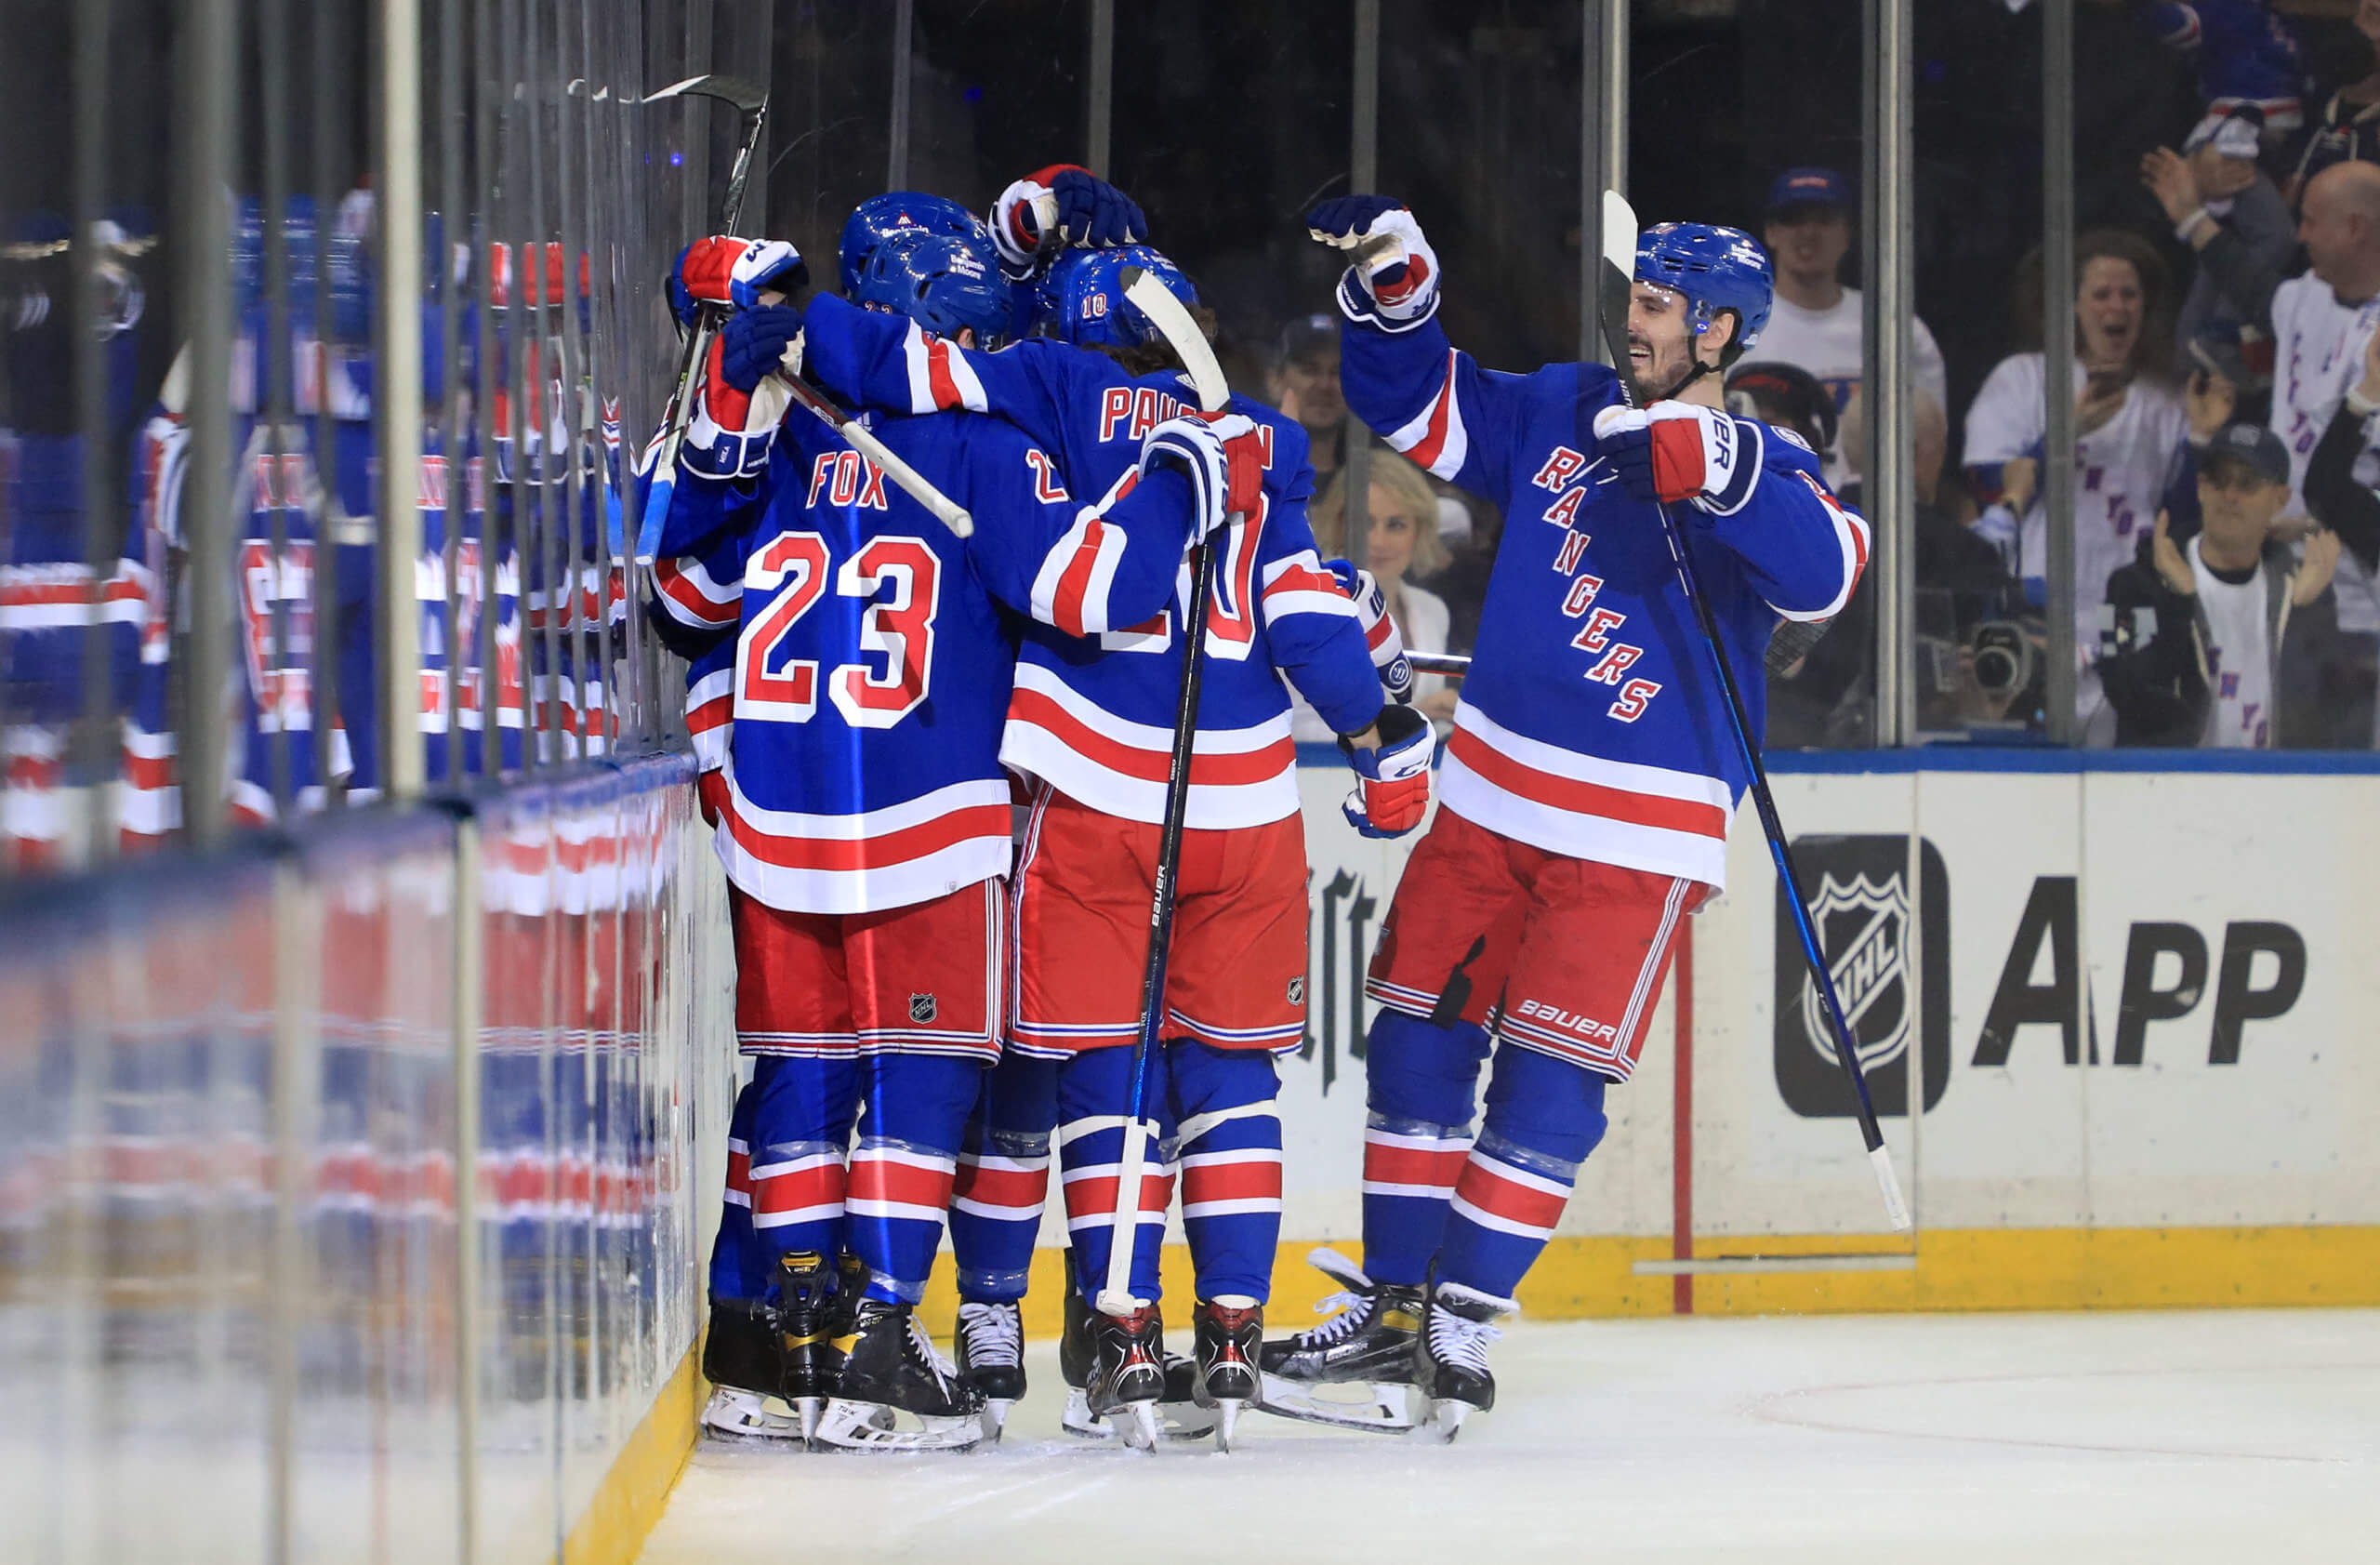 Mika Zibanejad's 5 Goals for the Rangers Help Bring the Playoffs